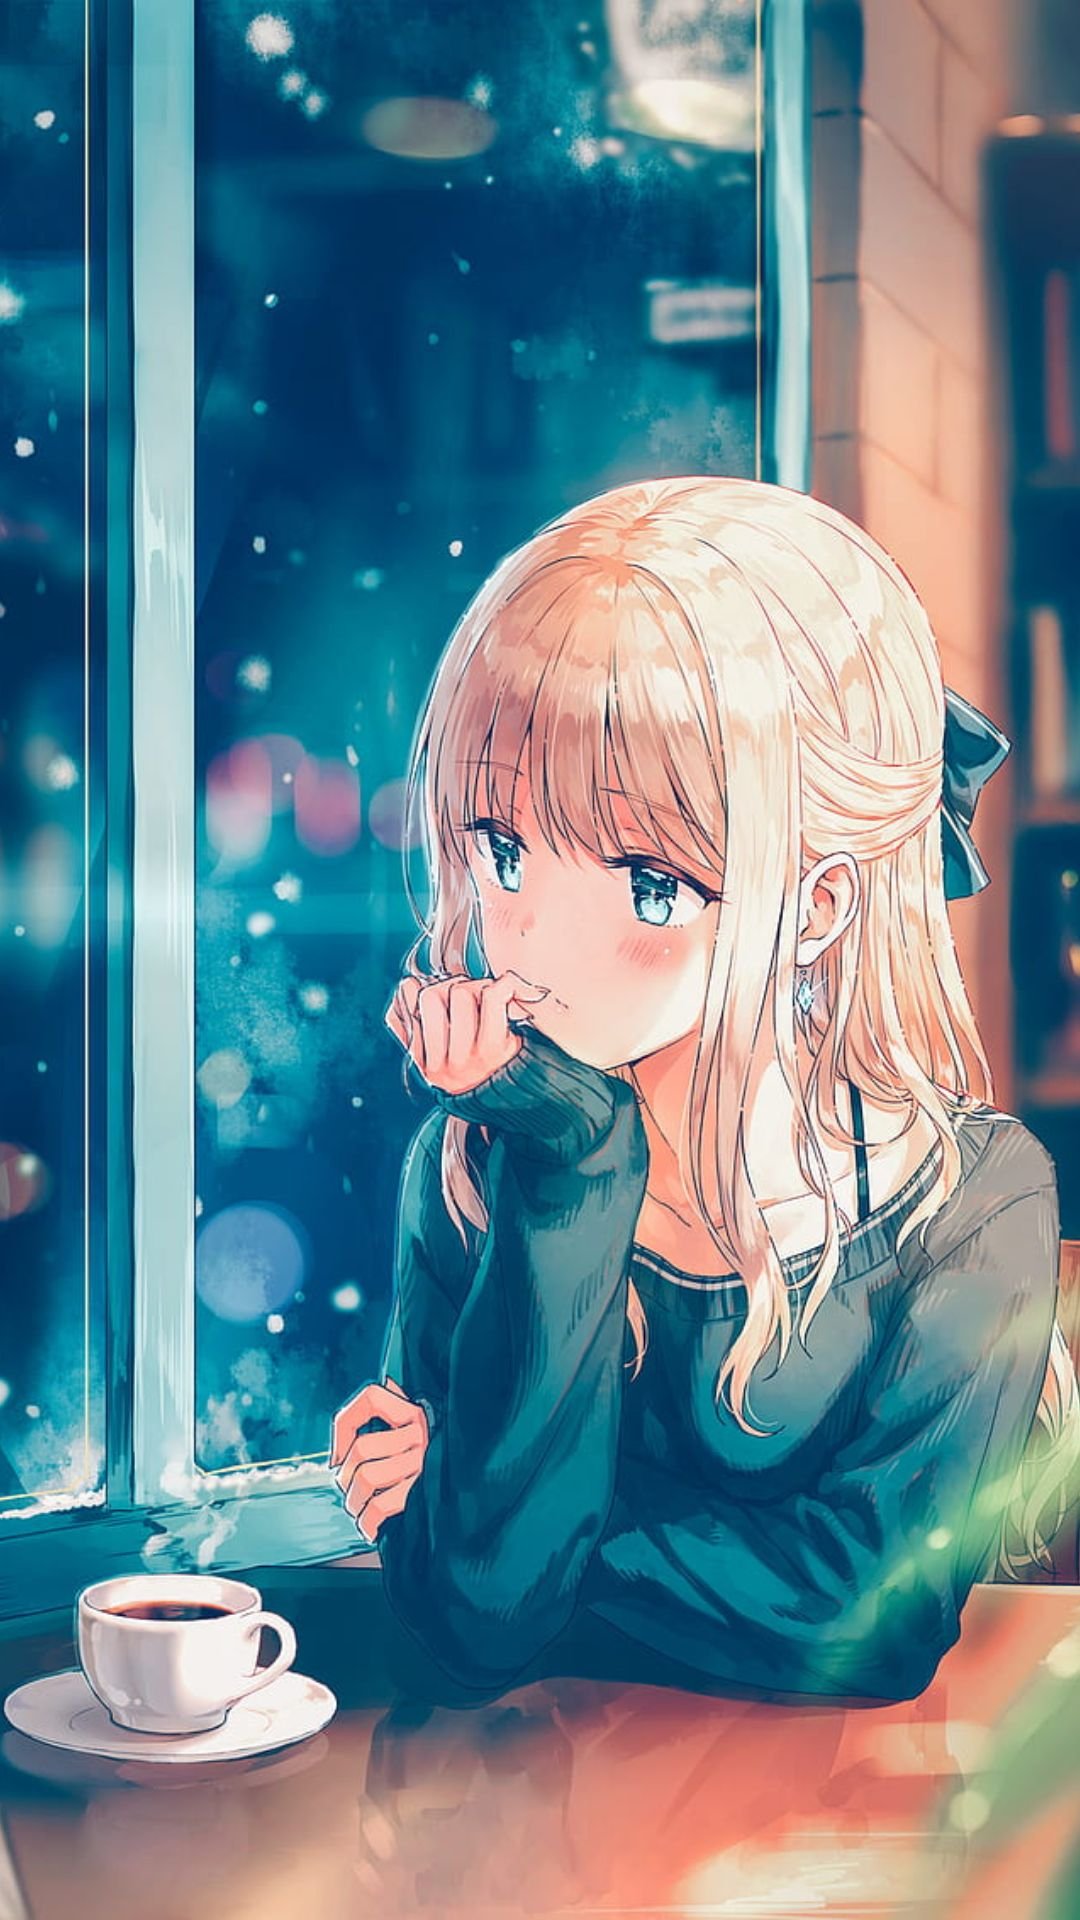 Cute Anime Girl Stock Photos, Images and Backgrounds for Free Download